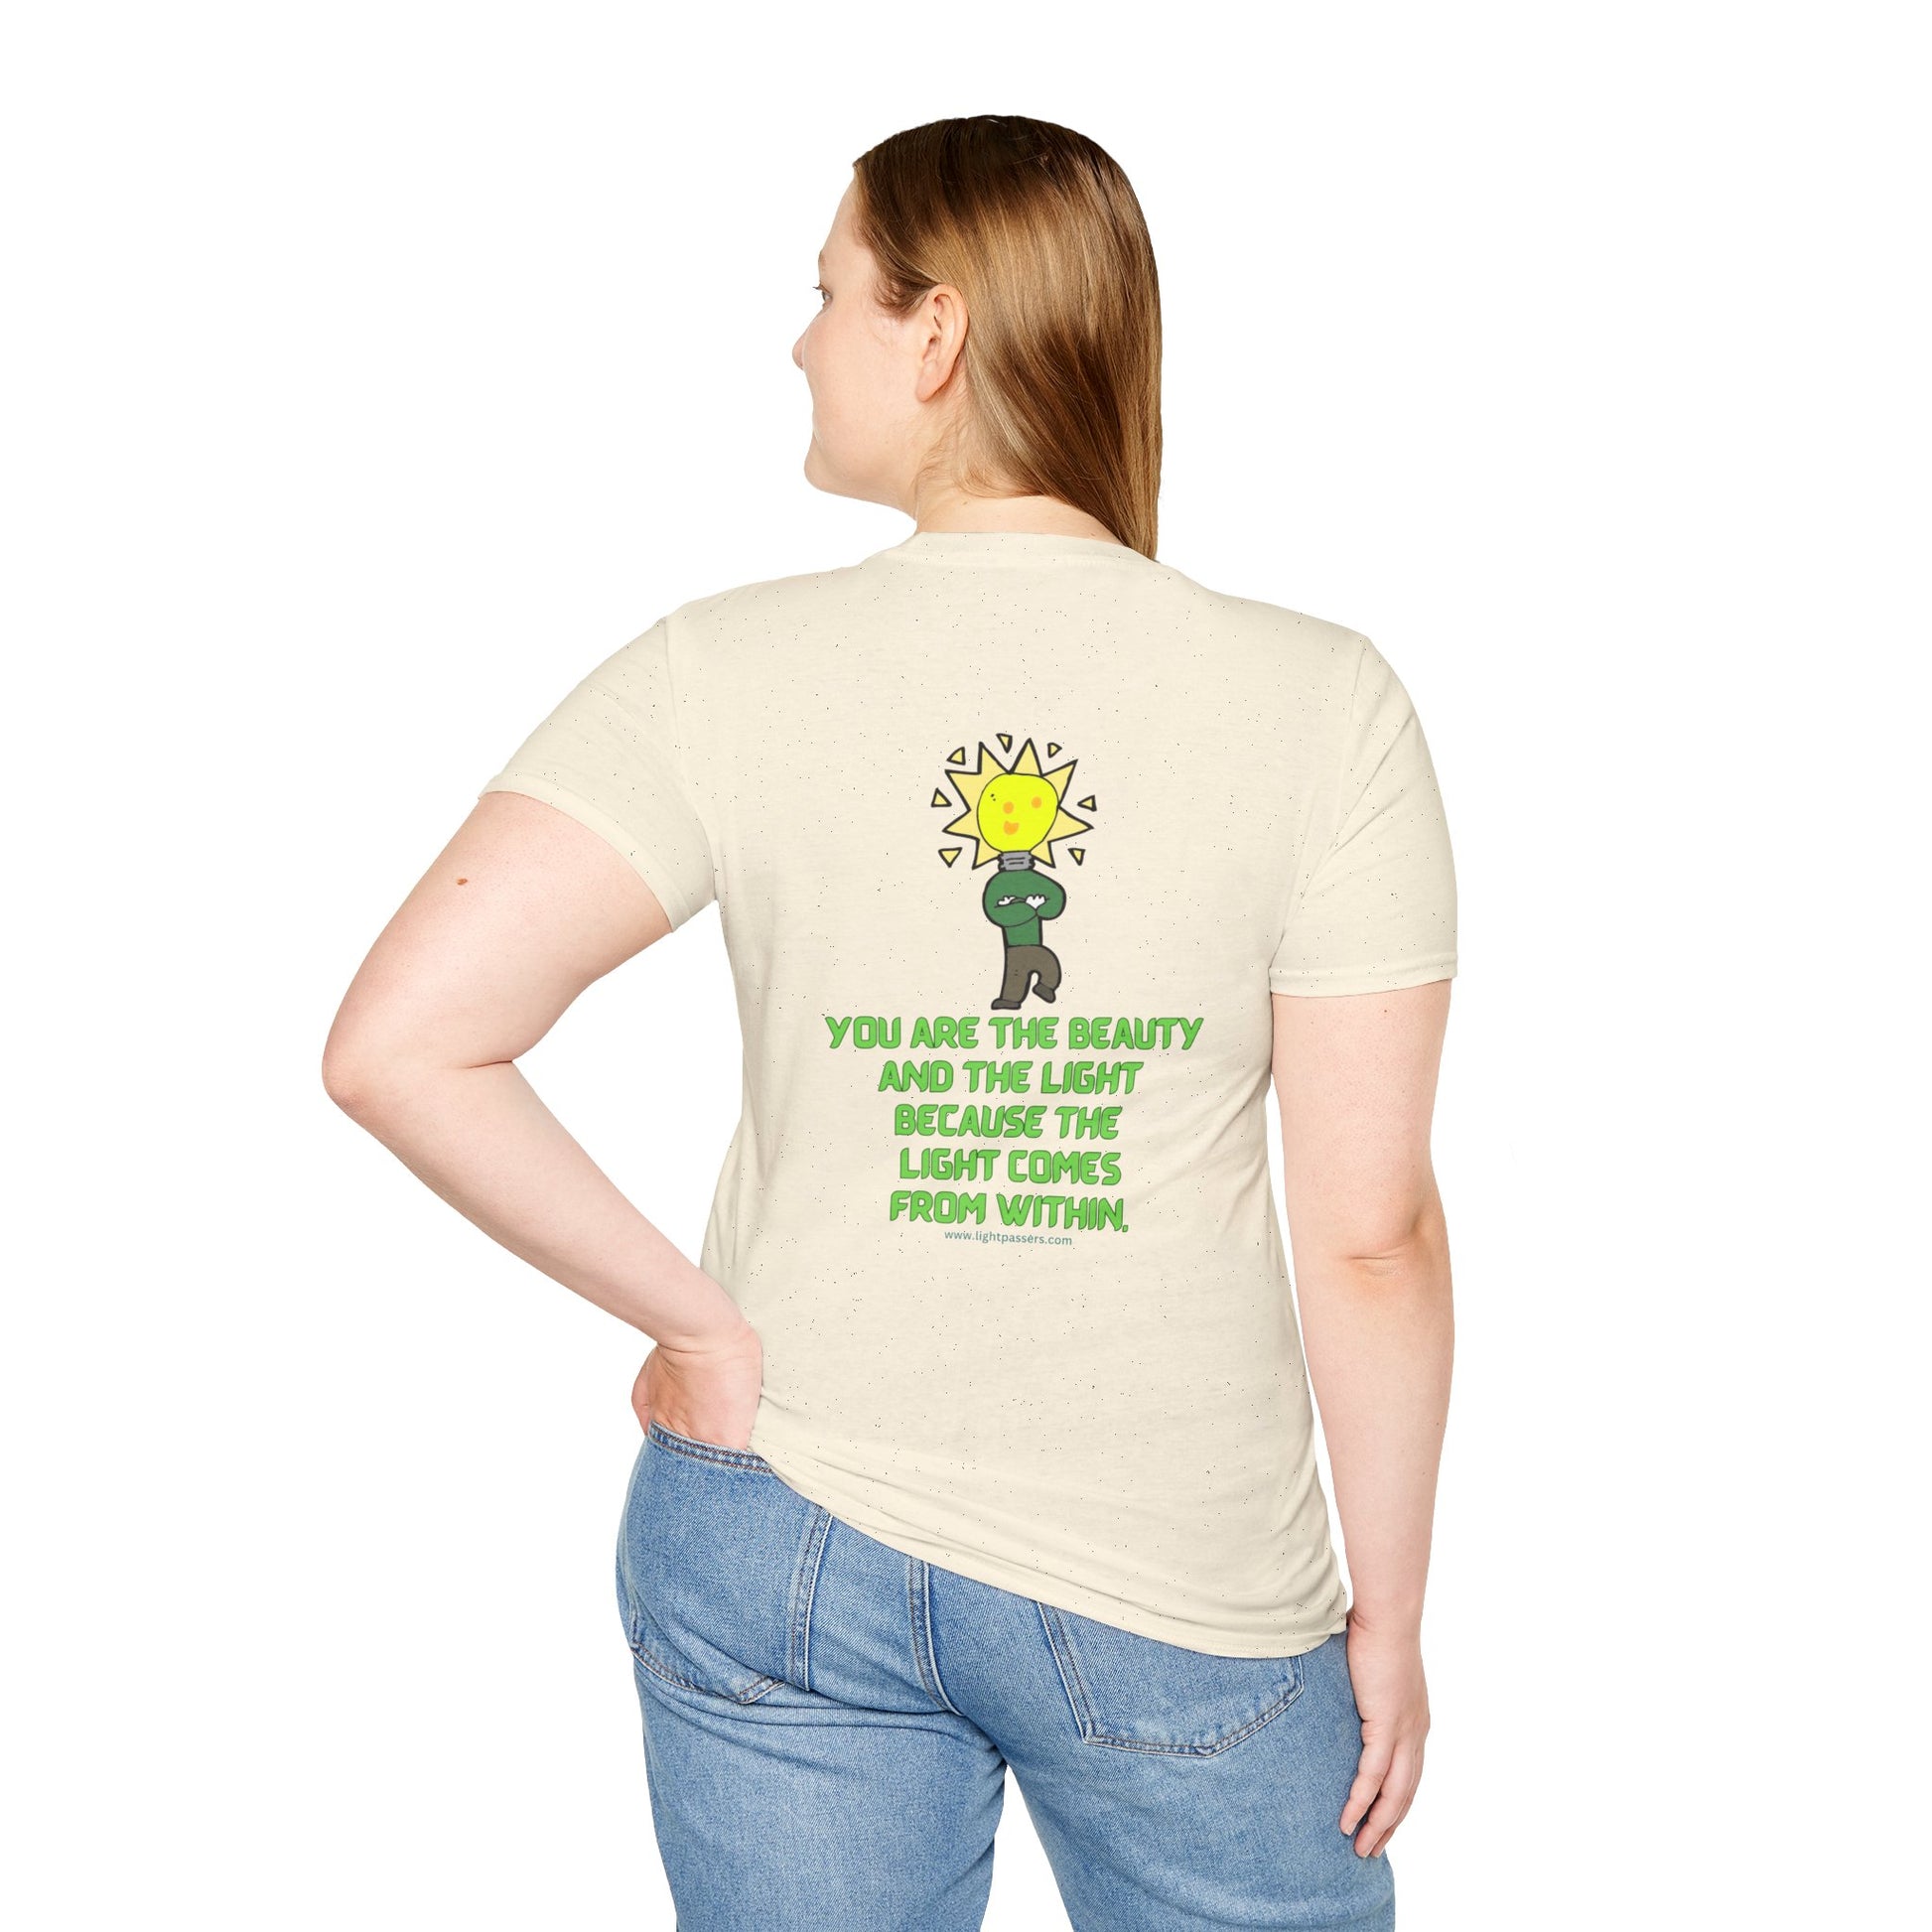 Unisex cotton tee featuring Beauty and the Light design on a woman in a white shirt, with a yellow sun graphic. Seamless, durable, with premium print quality.